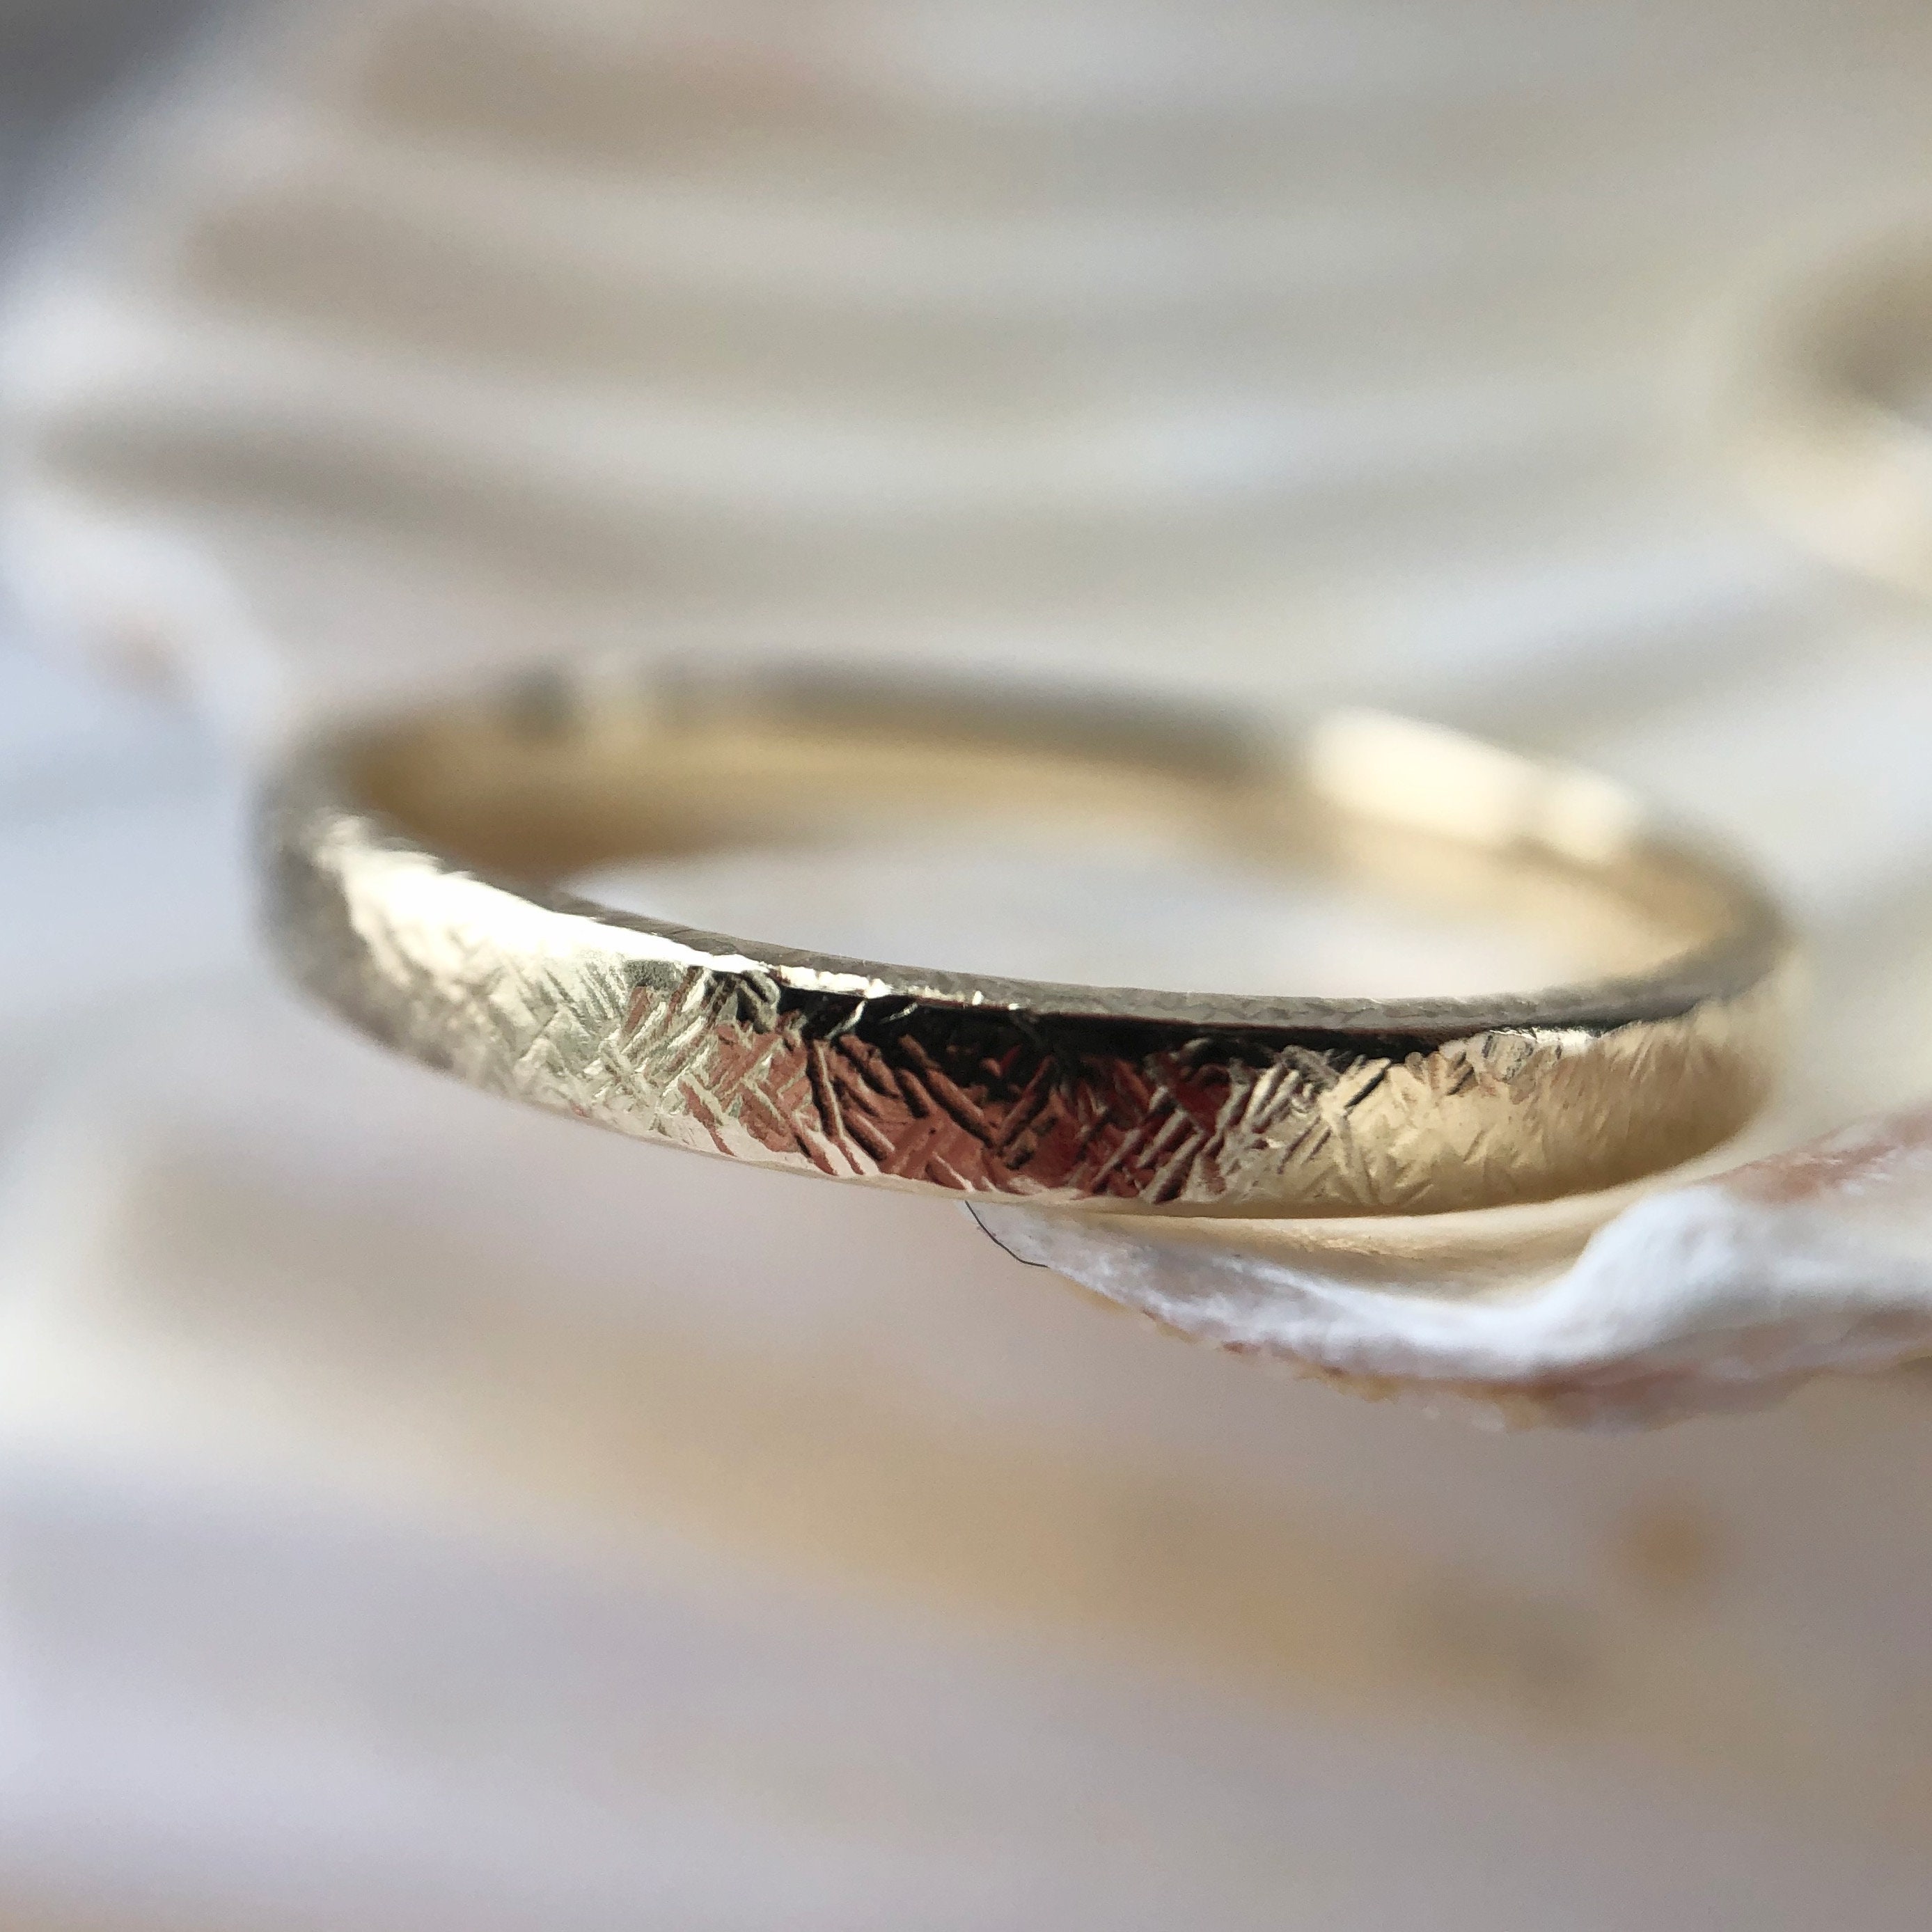 Recycled Gold Textured 2mm Ring - 9Ct Solid Delicate Wedding Band Or Beautiful Stacking Ring